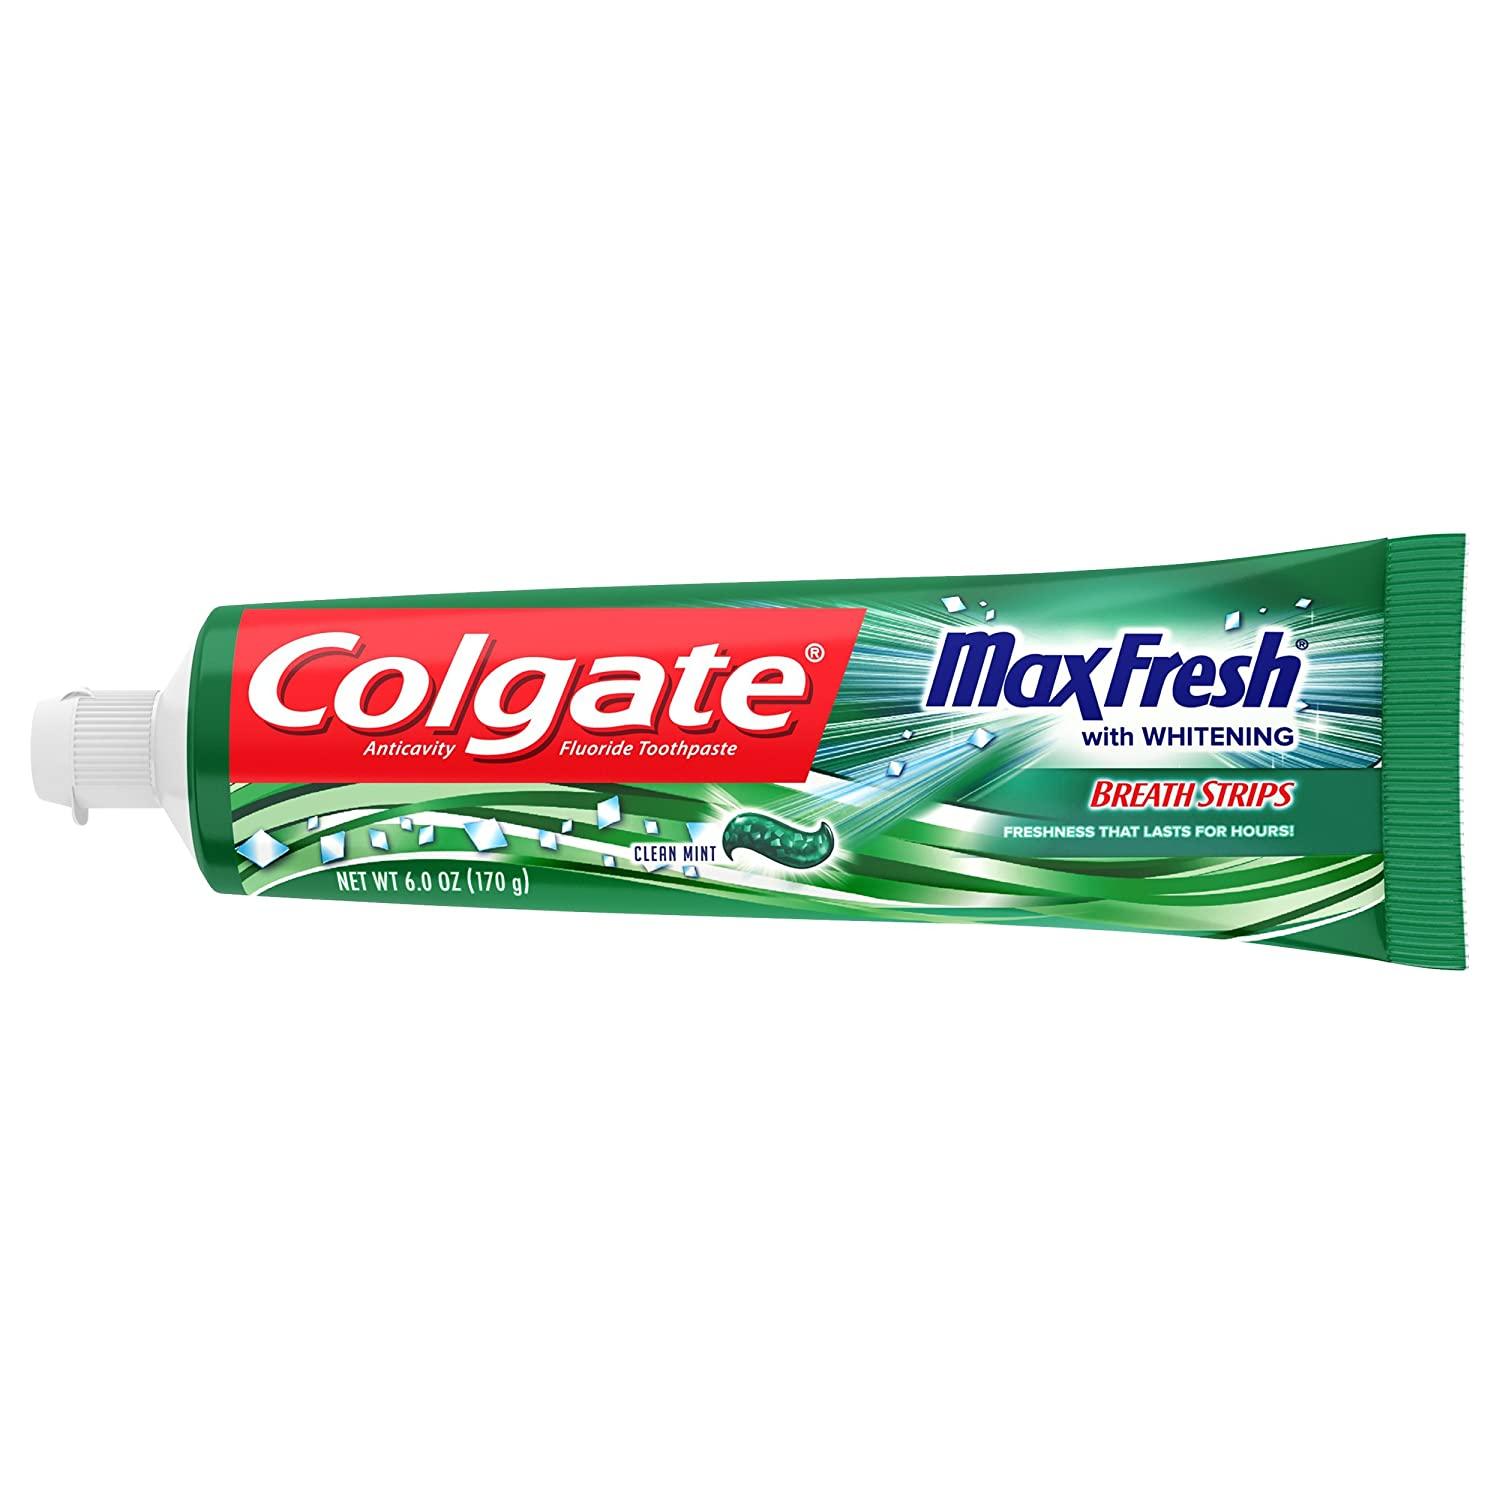 colgate-max-fresh-whitening-toothpaste-with-breath-strips-6-oz-limited